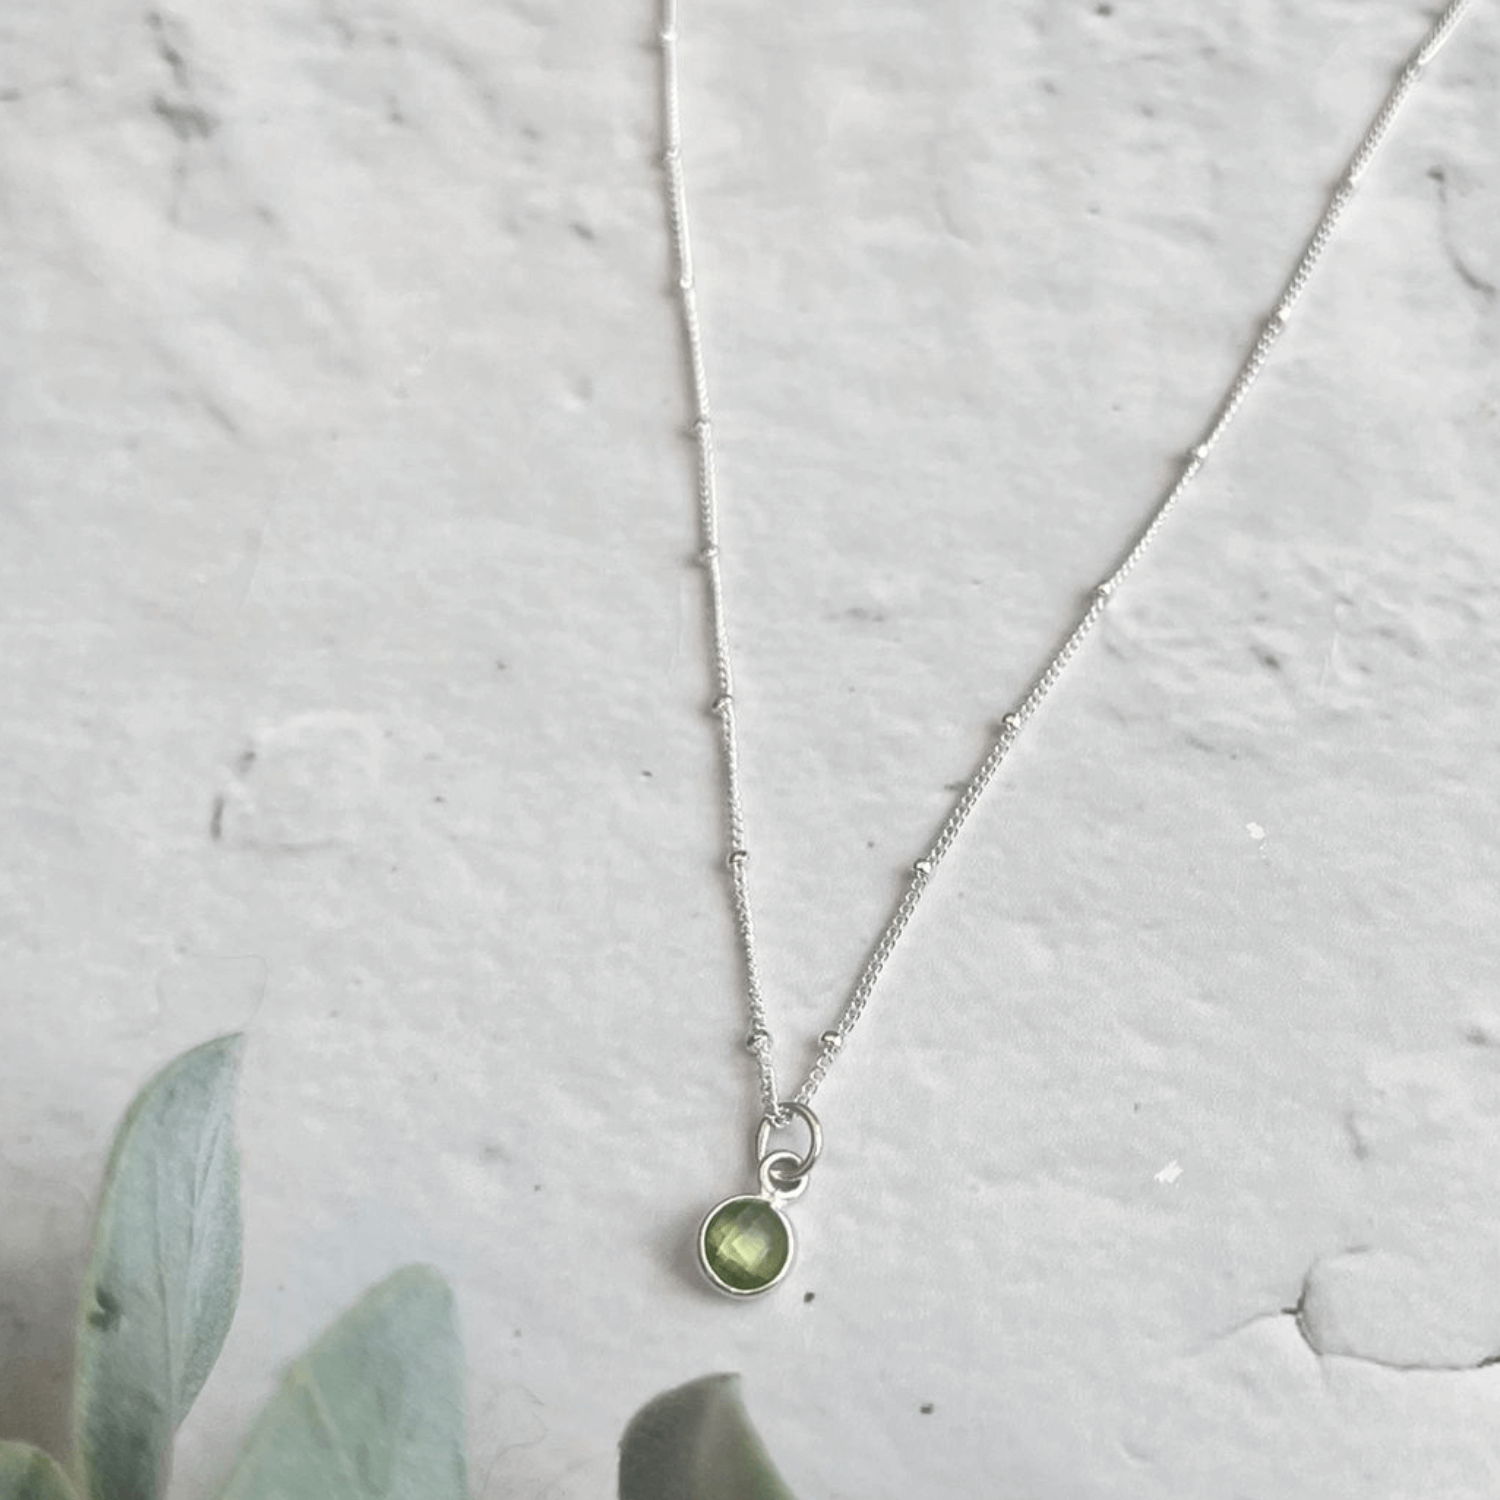 A delicate Made Here with Love Silver Peridot Birthstone Necklace with a small green gemstone pendant rests on a light grey textured surface. Below the necklace, the edge of a green plant can be seen. This beautiful piece is an exquisite example of handmade jewelry, perfect for those celebrating their August birthstone.